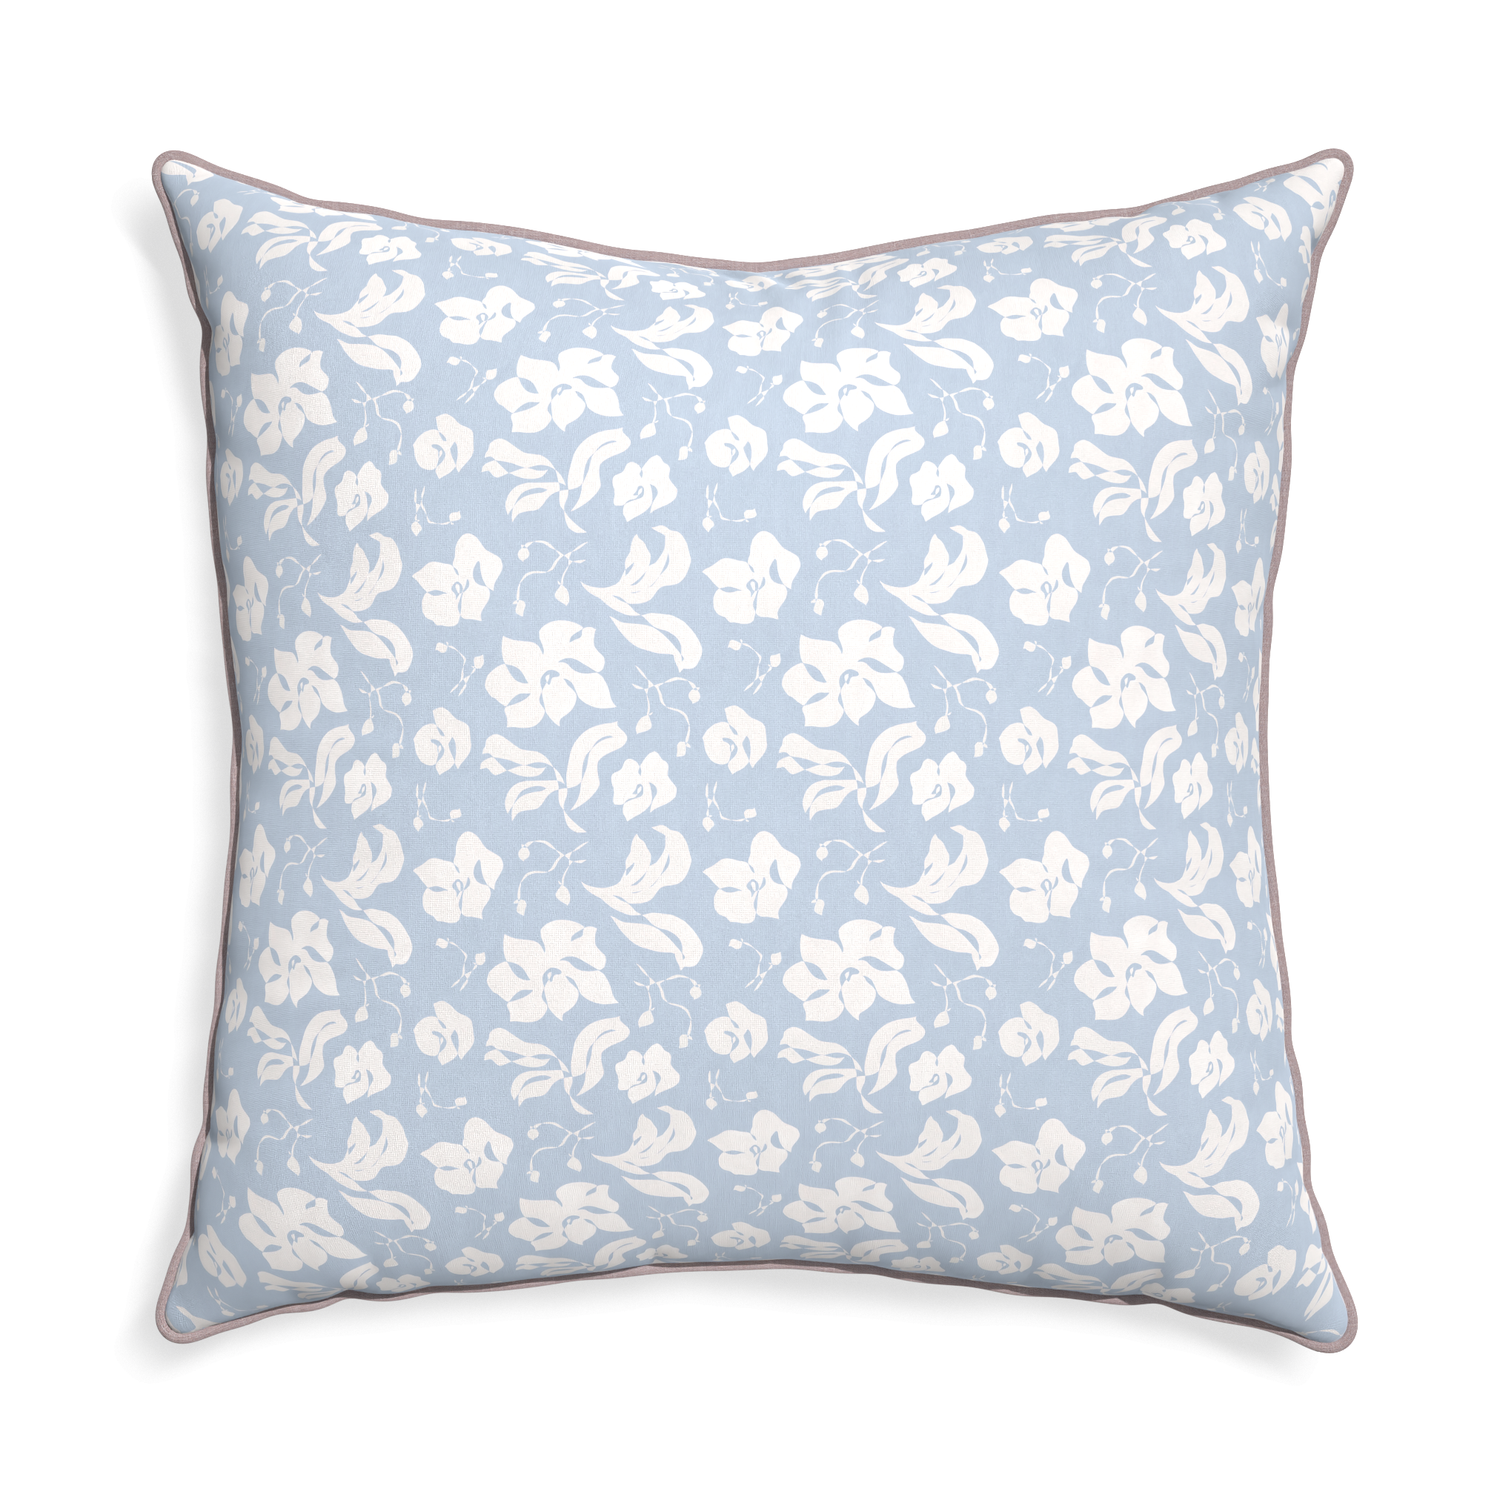 Euro-sham georgia custom cornflower blue floralpillow with orchid piping on white background